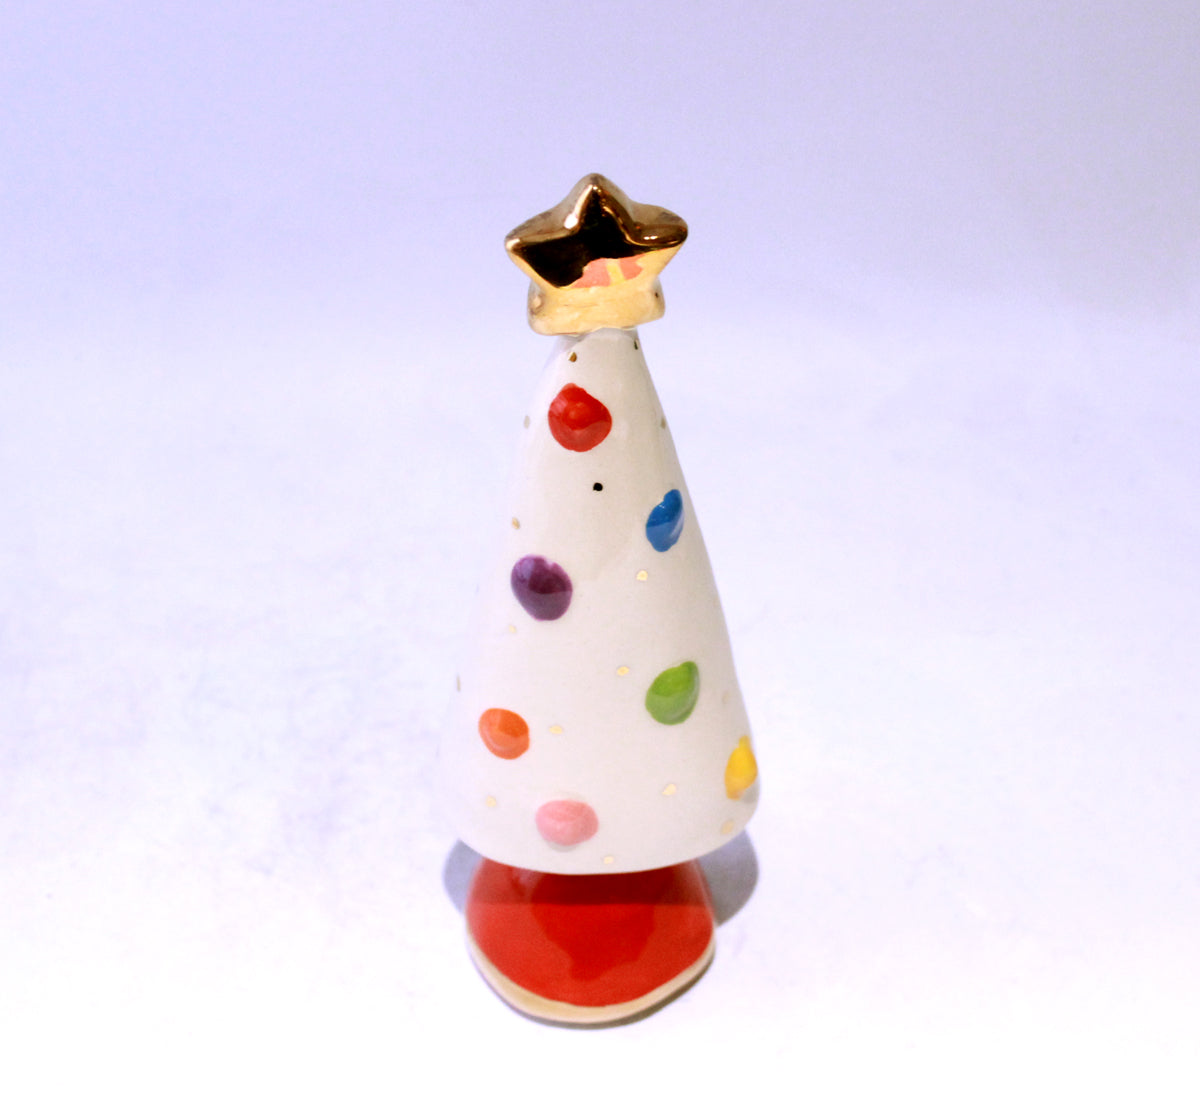 Small Christmas Tree in White with Coloured Ornaments and a Red Base